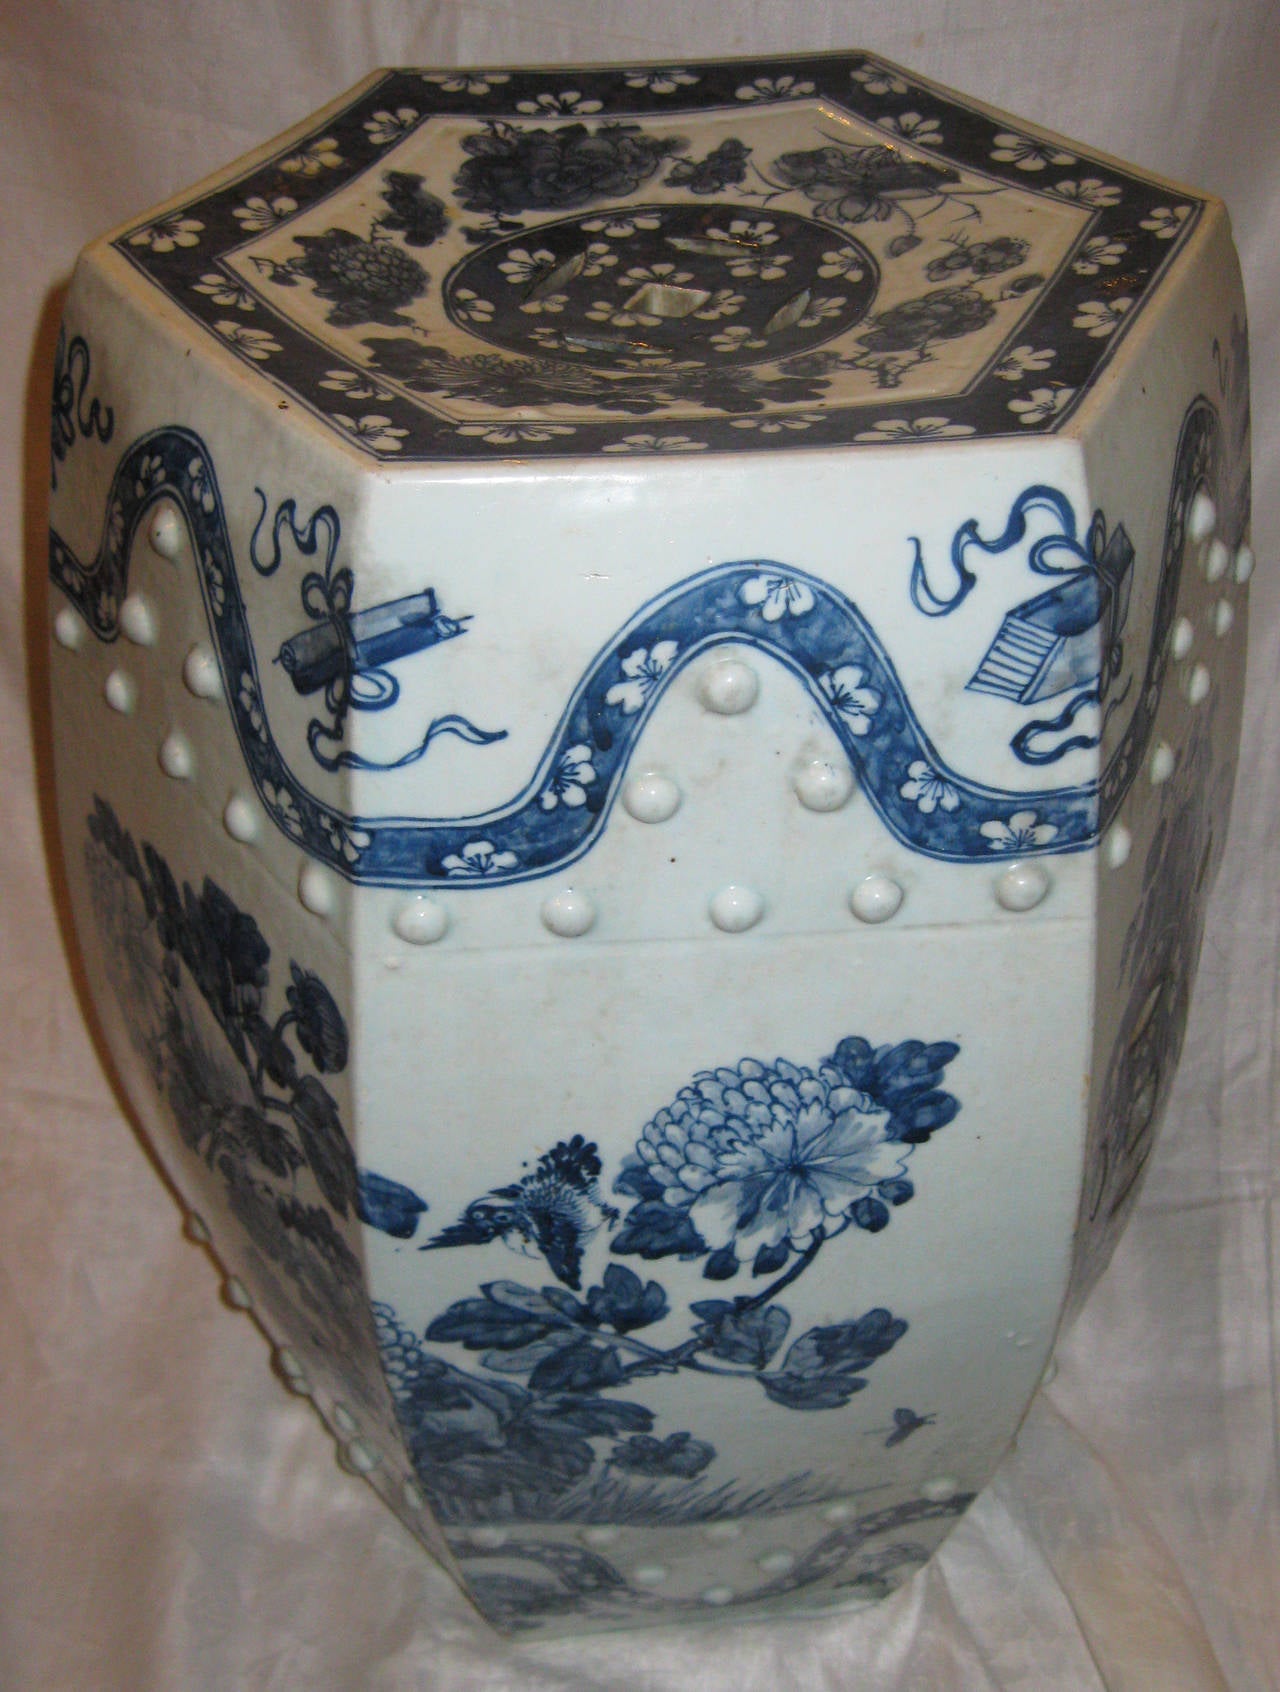 Hexagonal shaped Chinese Nanking Style Export blue and white glazed porcelain garden seat. Features include a pierced top and sides, molded relief dots and a very refined execution of floral design, a large bird, foliate lappets and other graceful